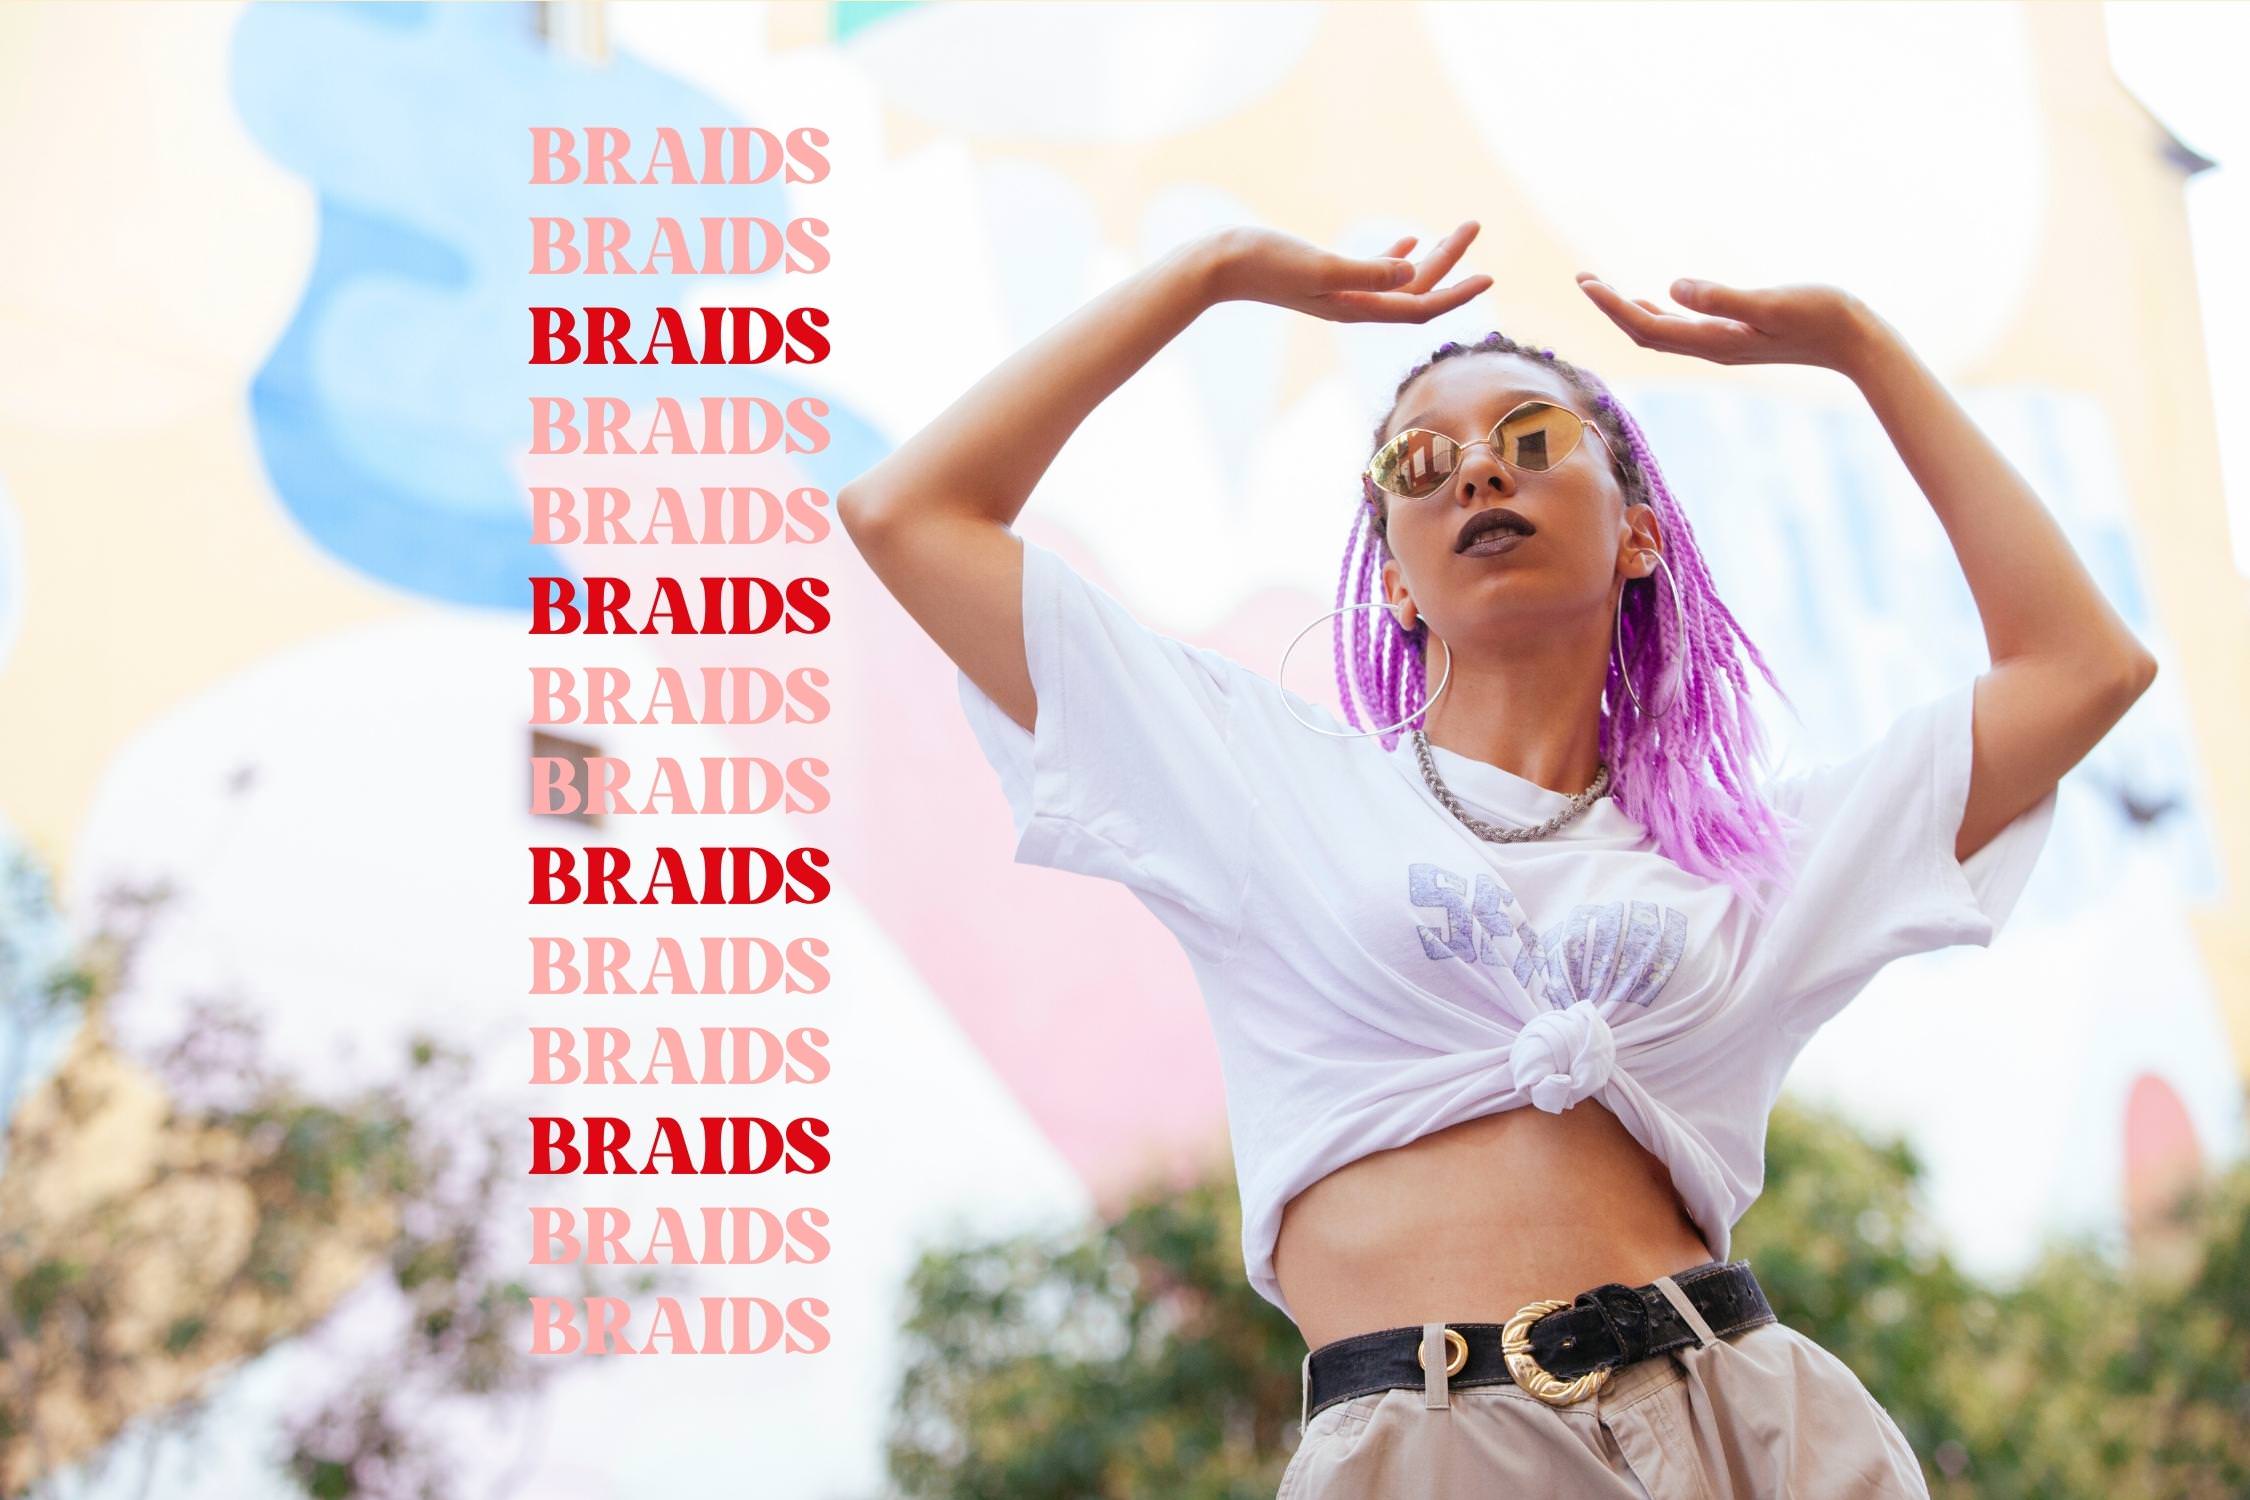 A girl stands outside with her arms up in the air. Her hair is done in short purple braids. She wears a white tshirt tied in a knot, beige pants and sunglasses. On the left is text that reads "Braids, Braids,Braids, Braids" all the way to the bottom of the image.   